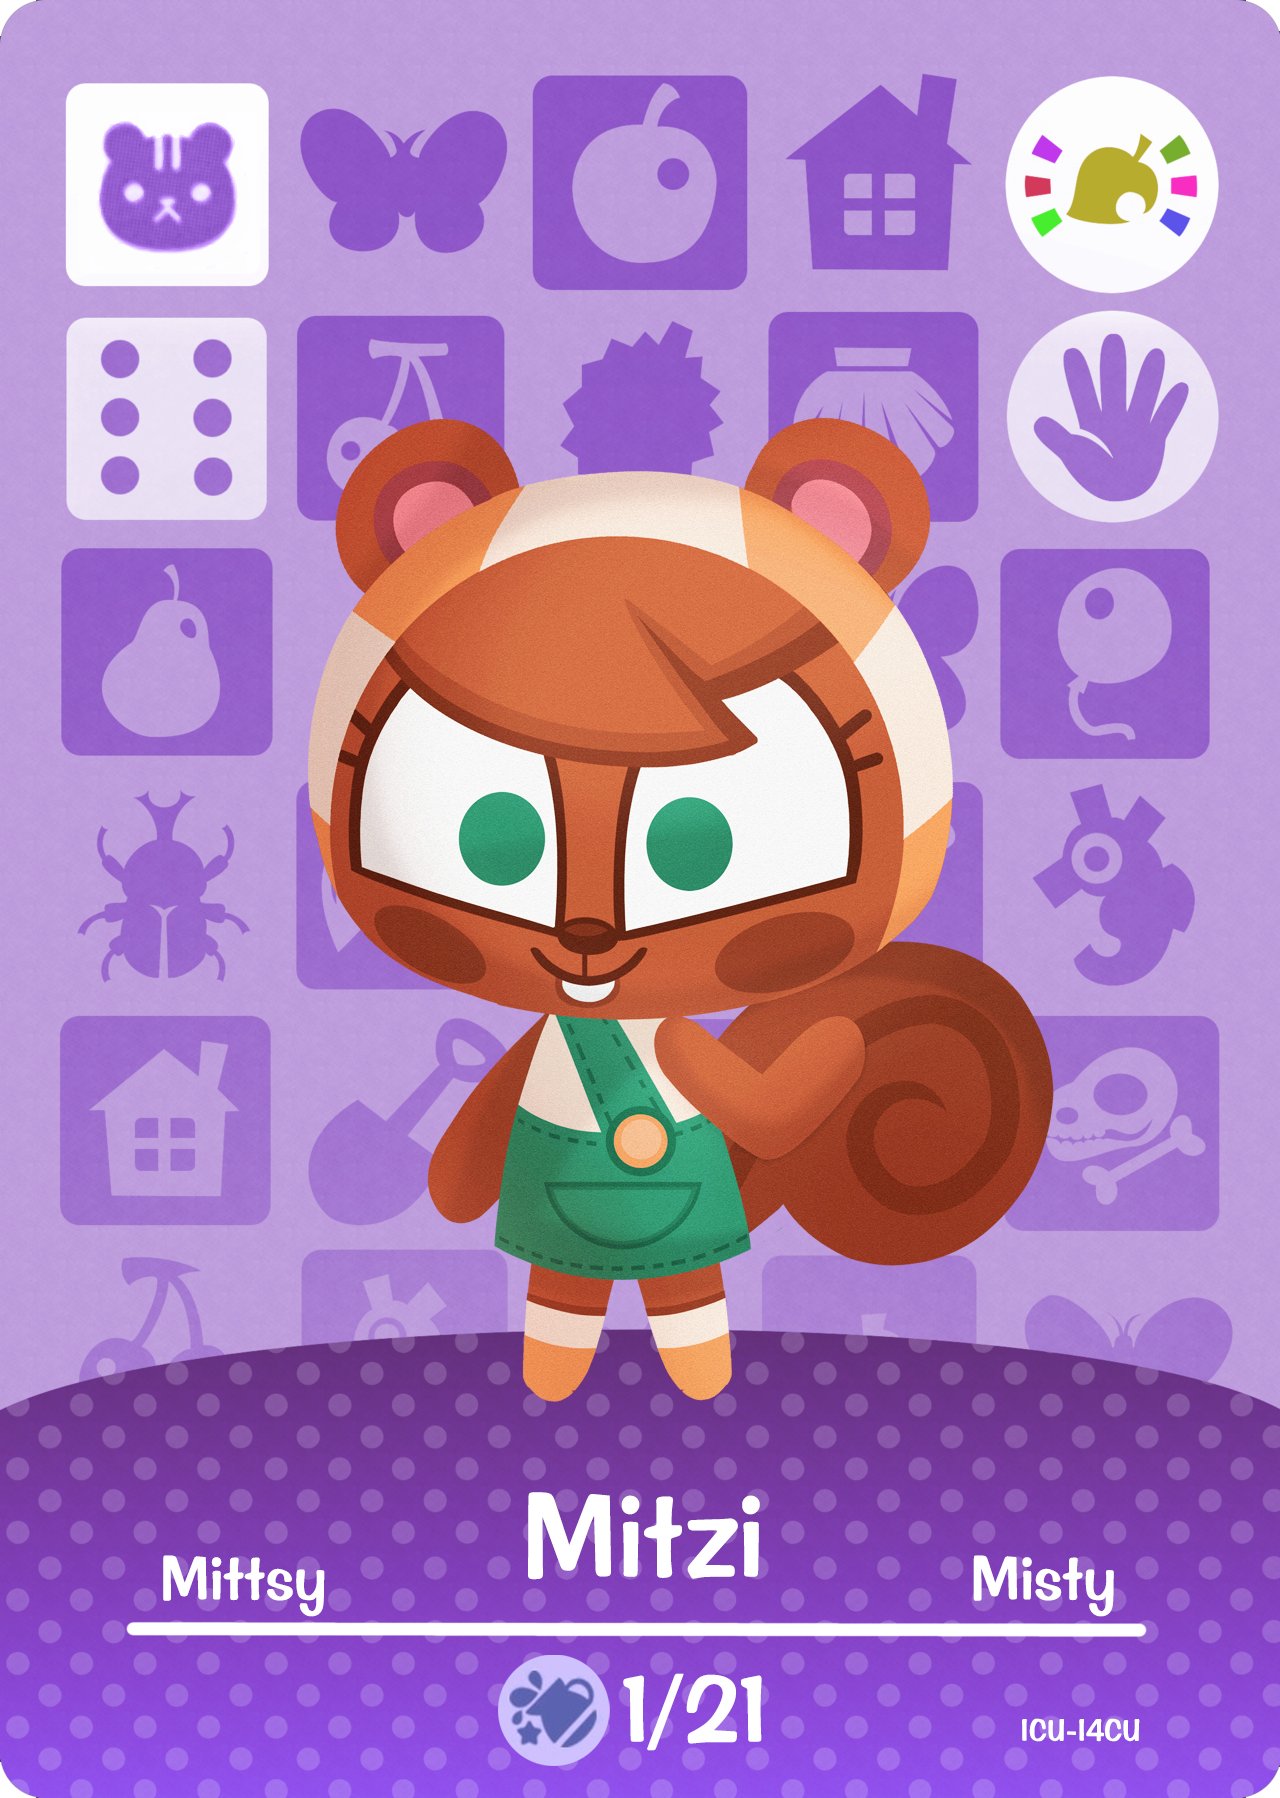 AJMarekArt on Twitter: "It's Animal Crossing day! I made some fake amiibo cards of my characters using some artwork I made last year. get to playing this game eventually once